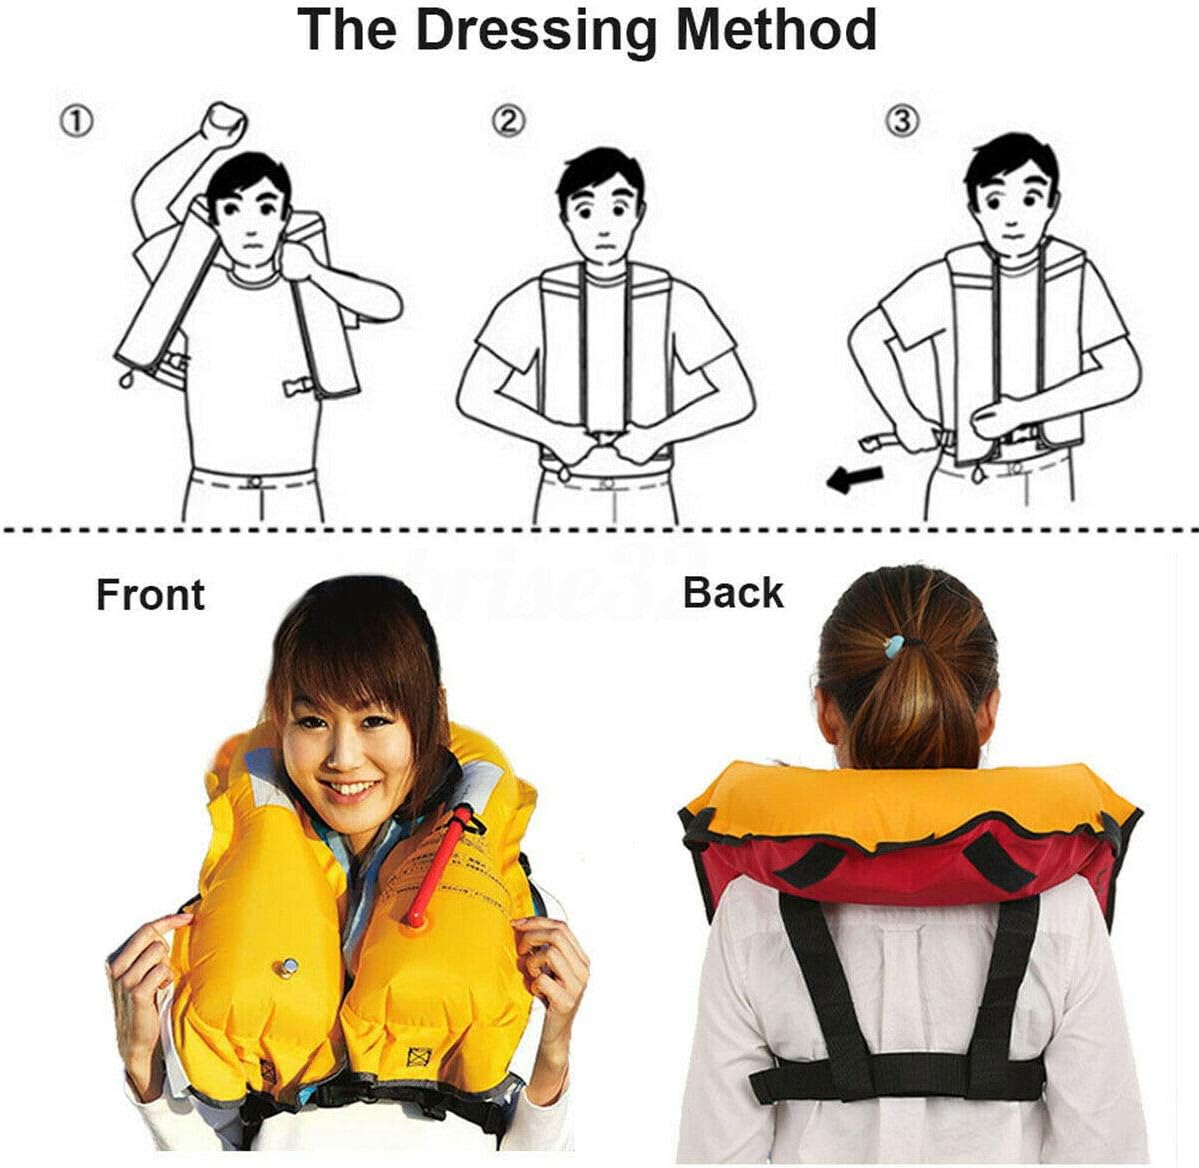 Premium Safety Adult Life Jacket with Whistle - Auto Version Inflatable Lifejacket Life Vest Preserver PFD for Boating Fishing Sailing Kayaking Surfing Paddling Swimming - Adjustable Life Saving Vest - Premium Safety Adult Life Jacket With Whistle Review